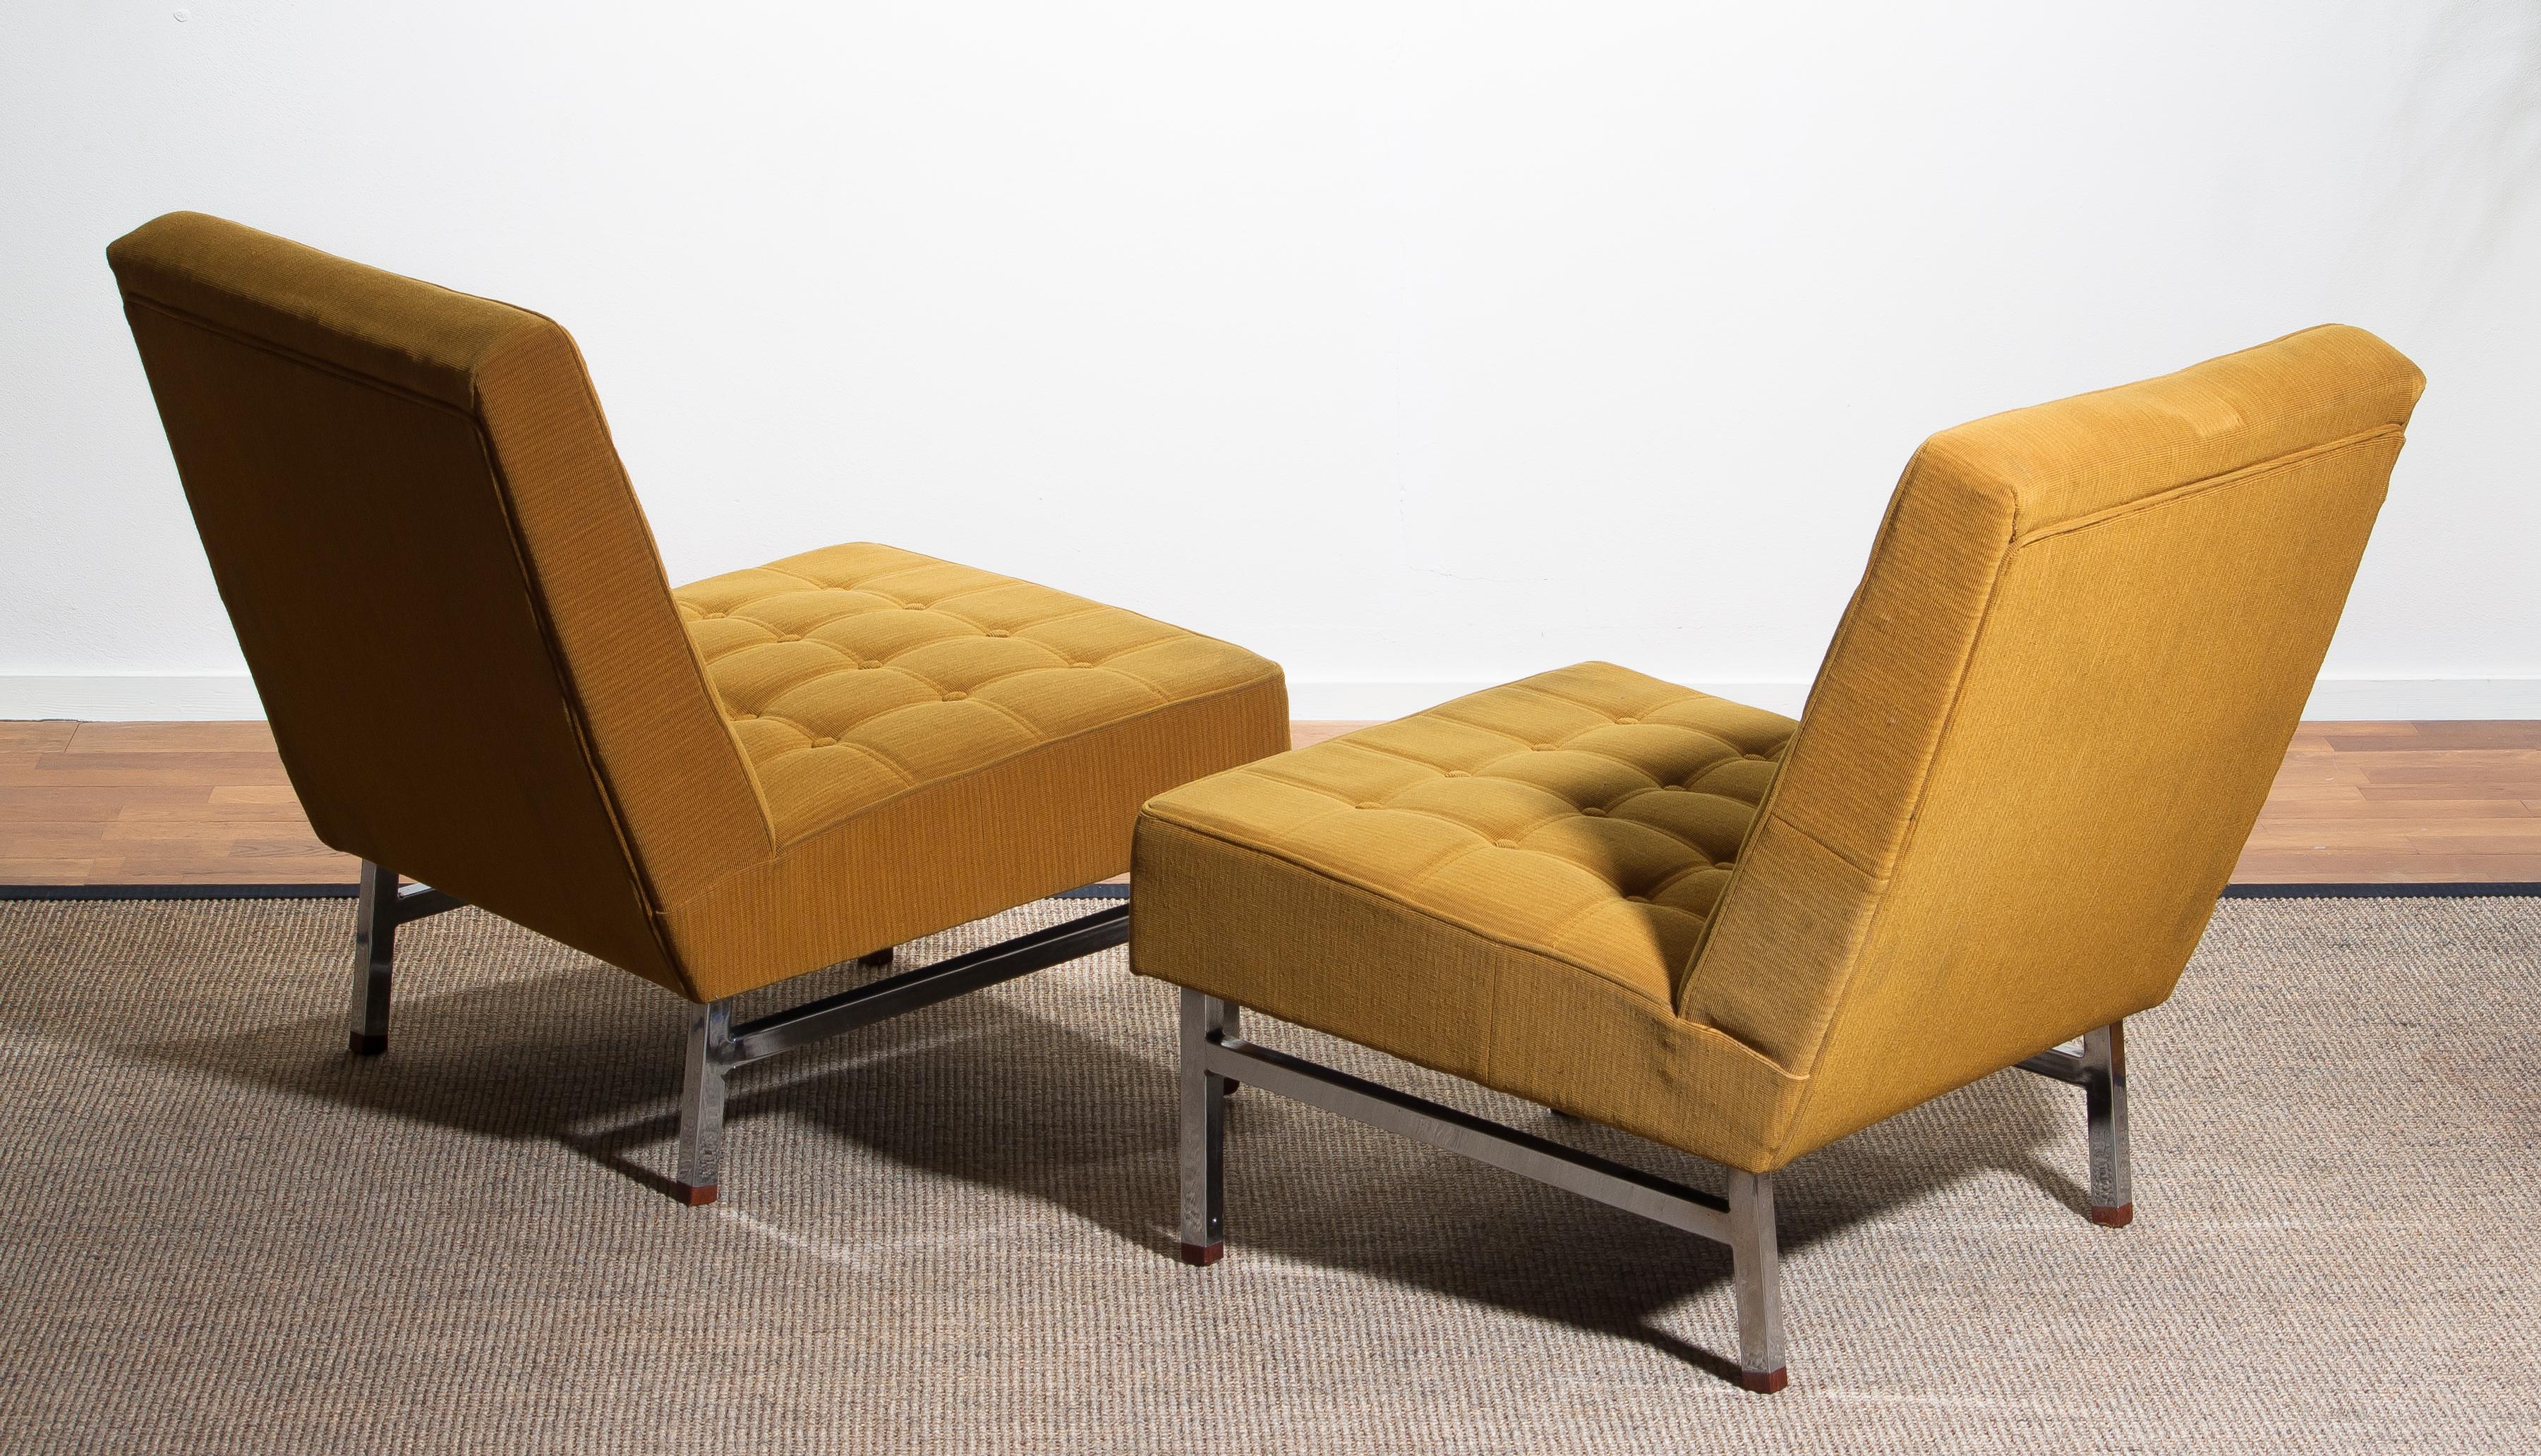 1960, set of two comfortable and extremely rare lounge chairs designed by Karl Erik Ekselius for JOC Möbler Vetlanda, Sweden.
Both chairs are original and in good condition. Somewhat dry filling.
Stands are made of chromed metal with teak ends.
  